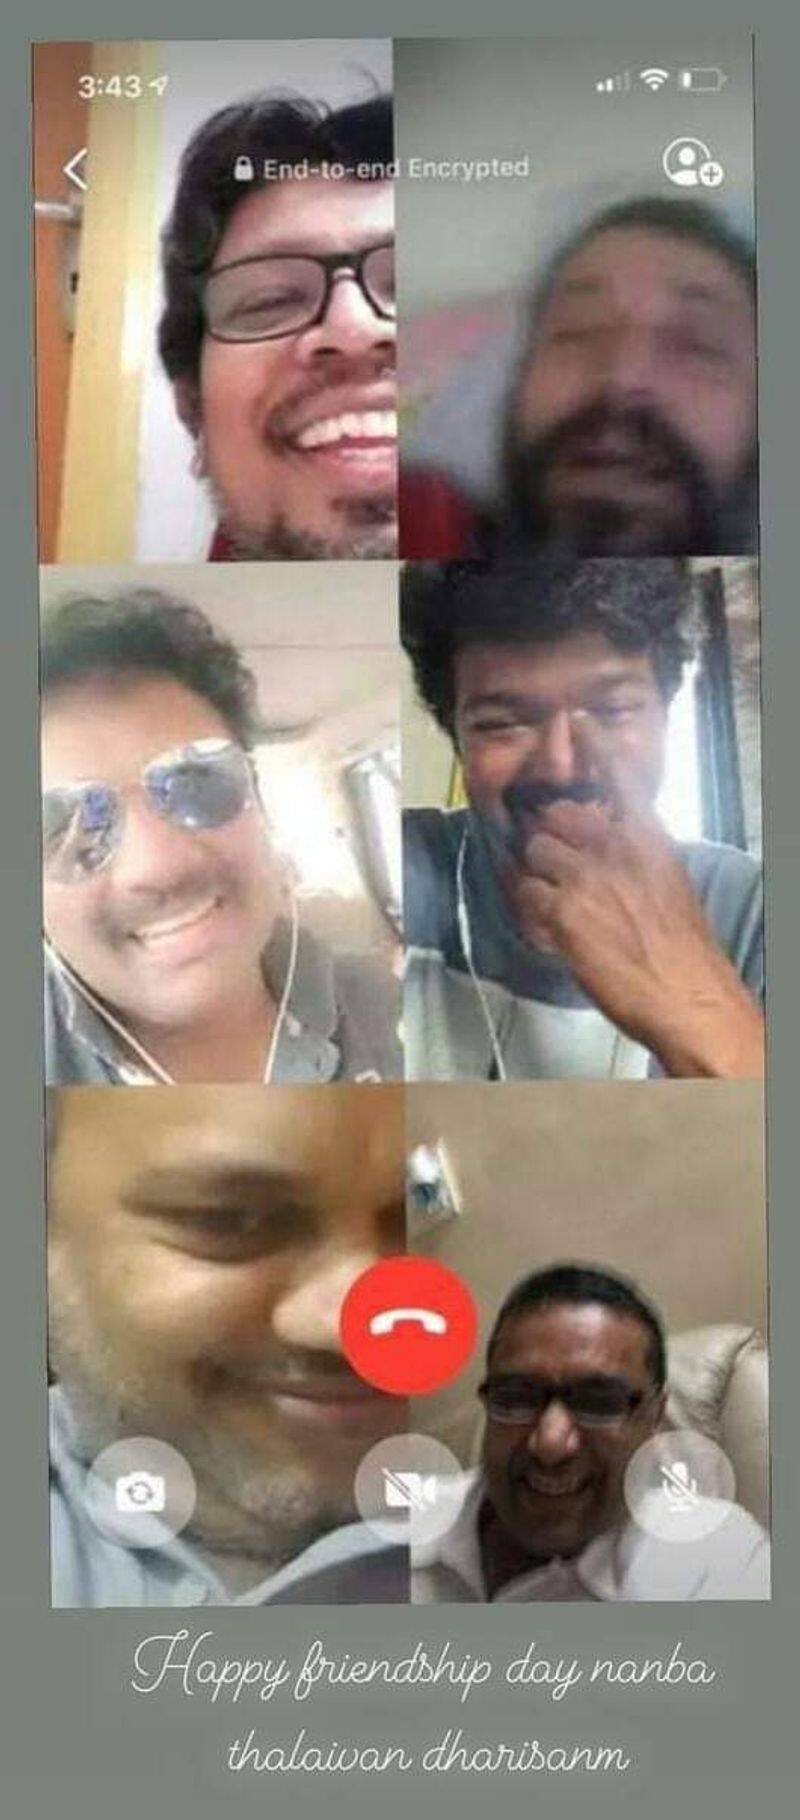 Actor Vijay talking on video call with friends photo viral in friendship day